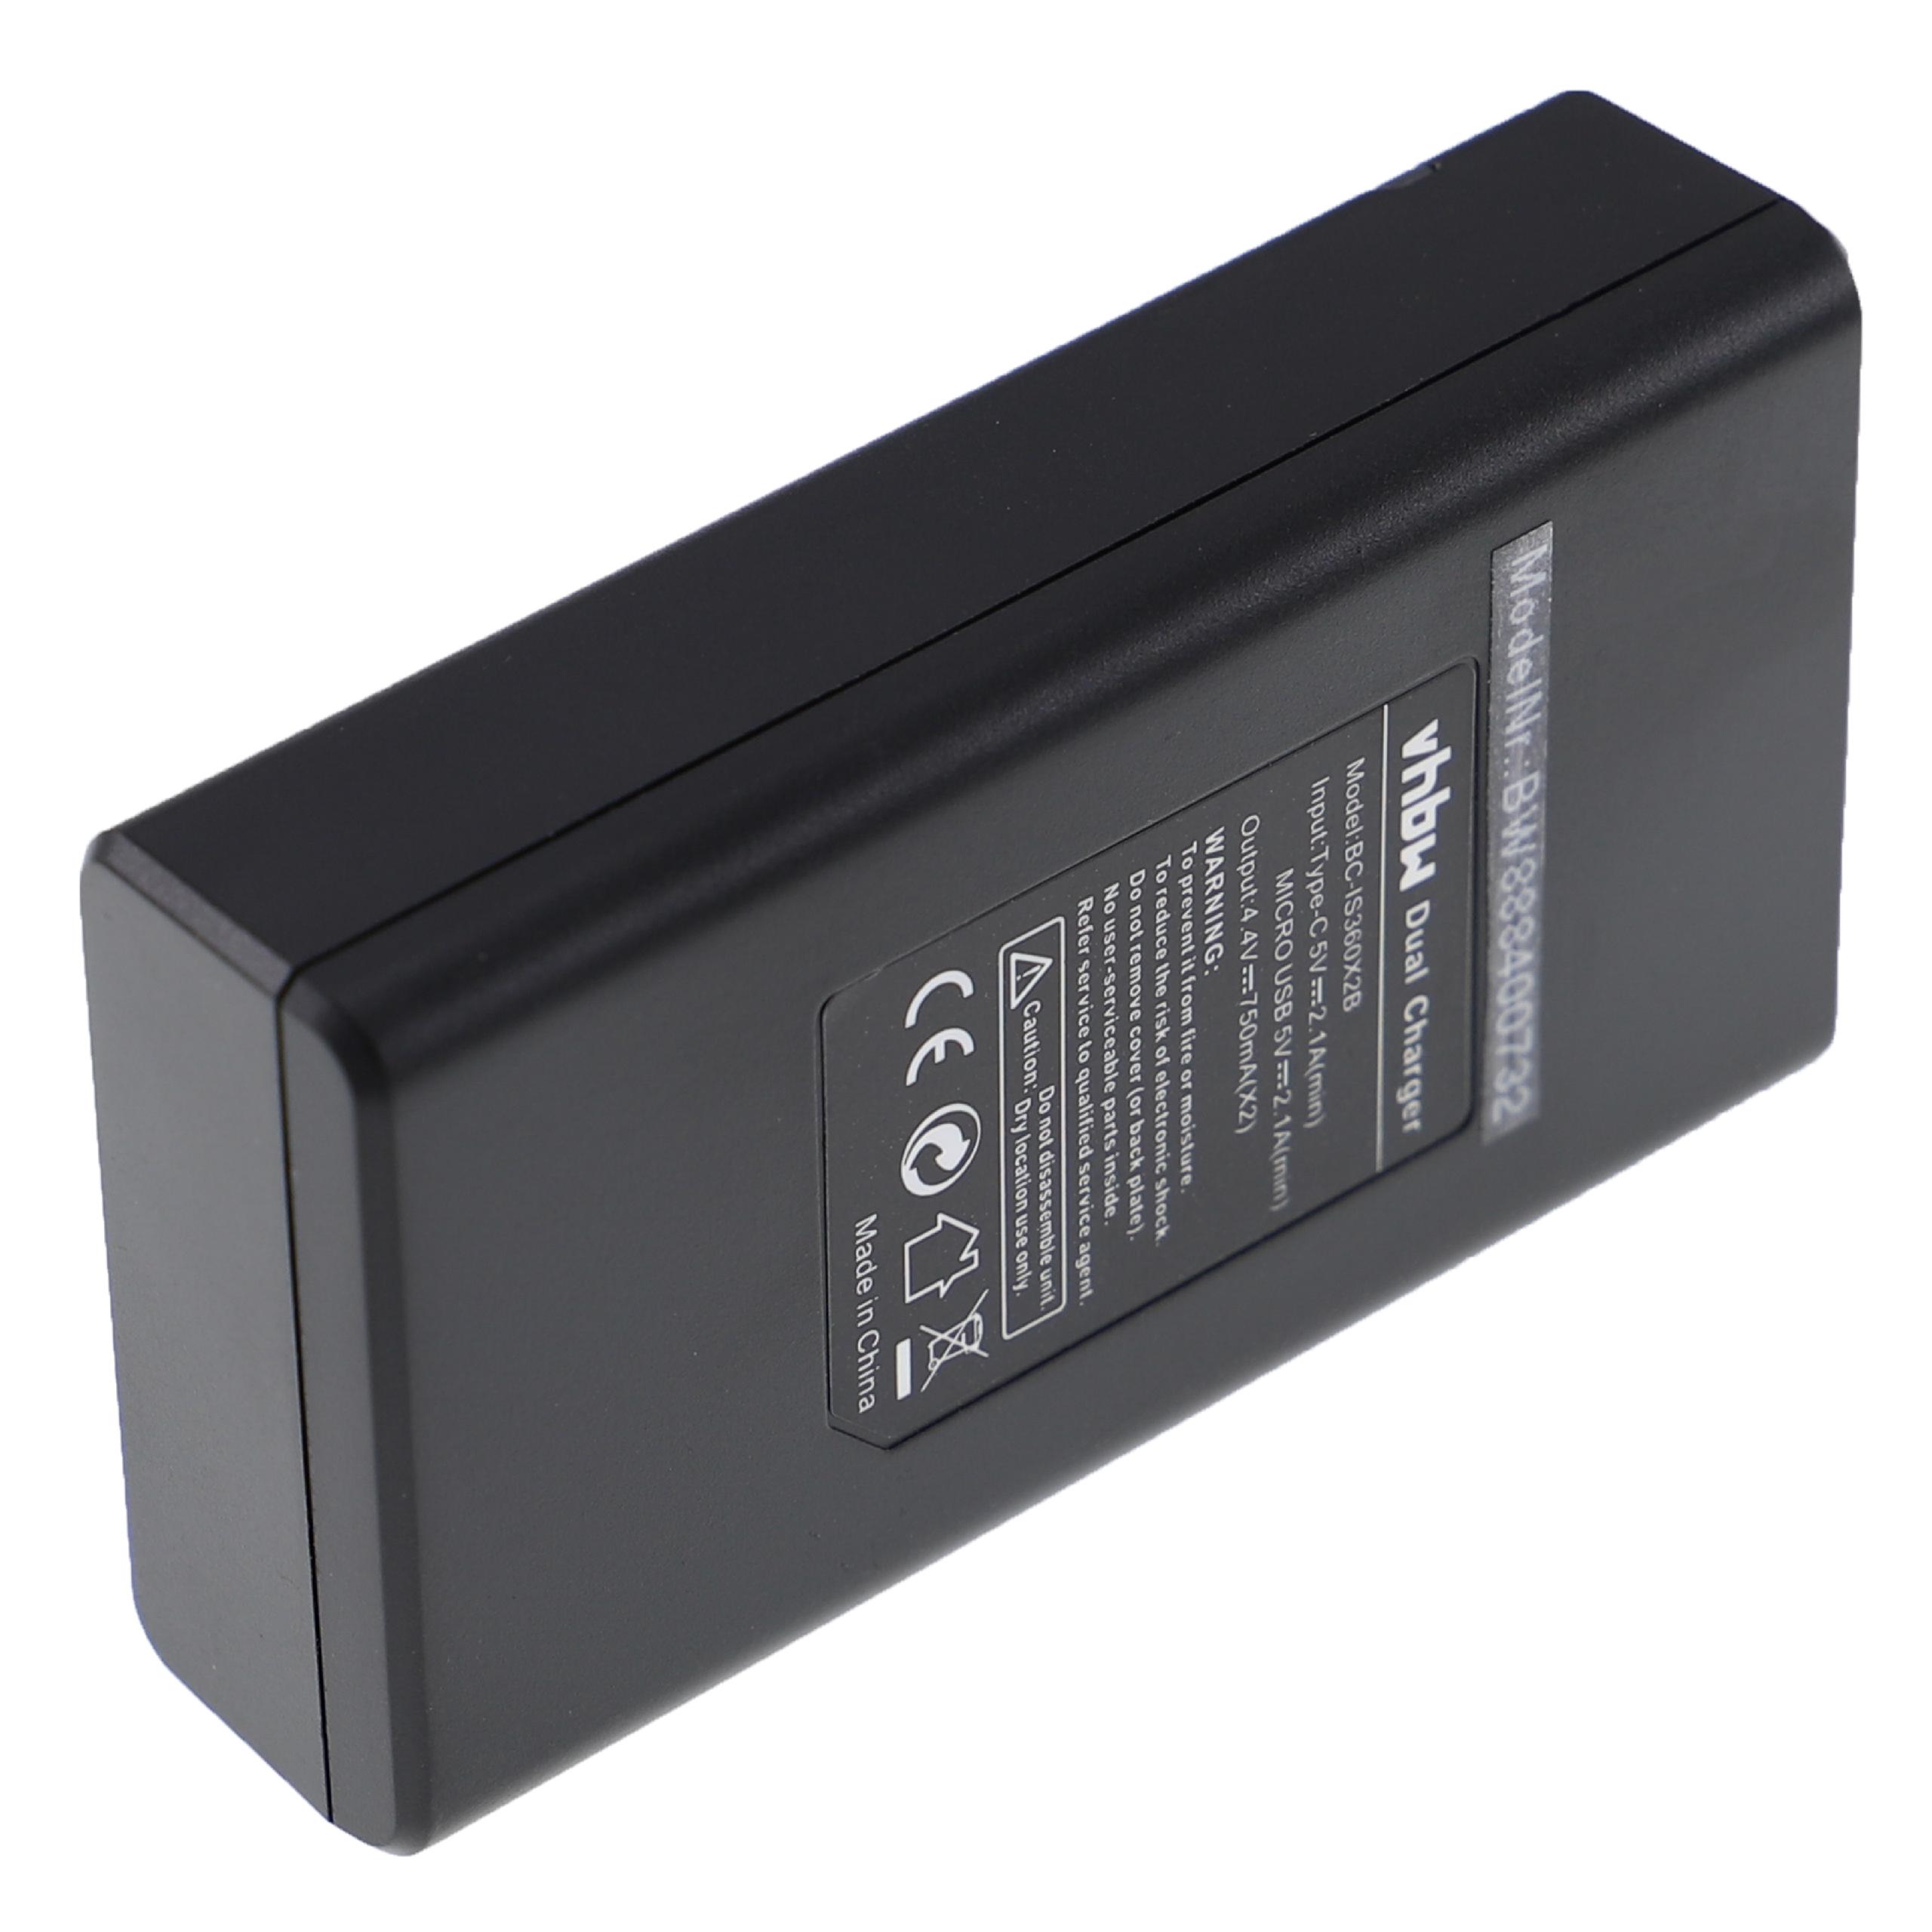 Battery Charger suitable for One X2 Camera etc. - 0.75 A, 4.4 V